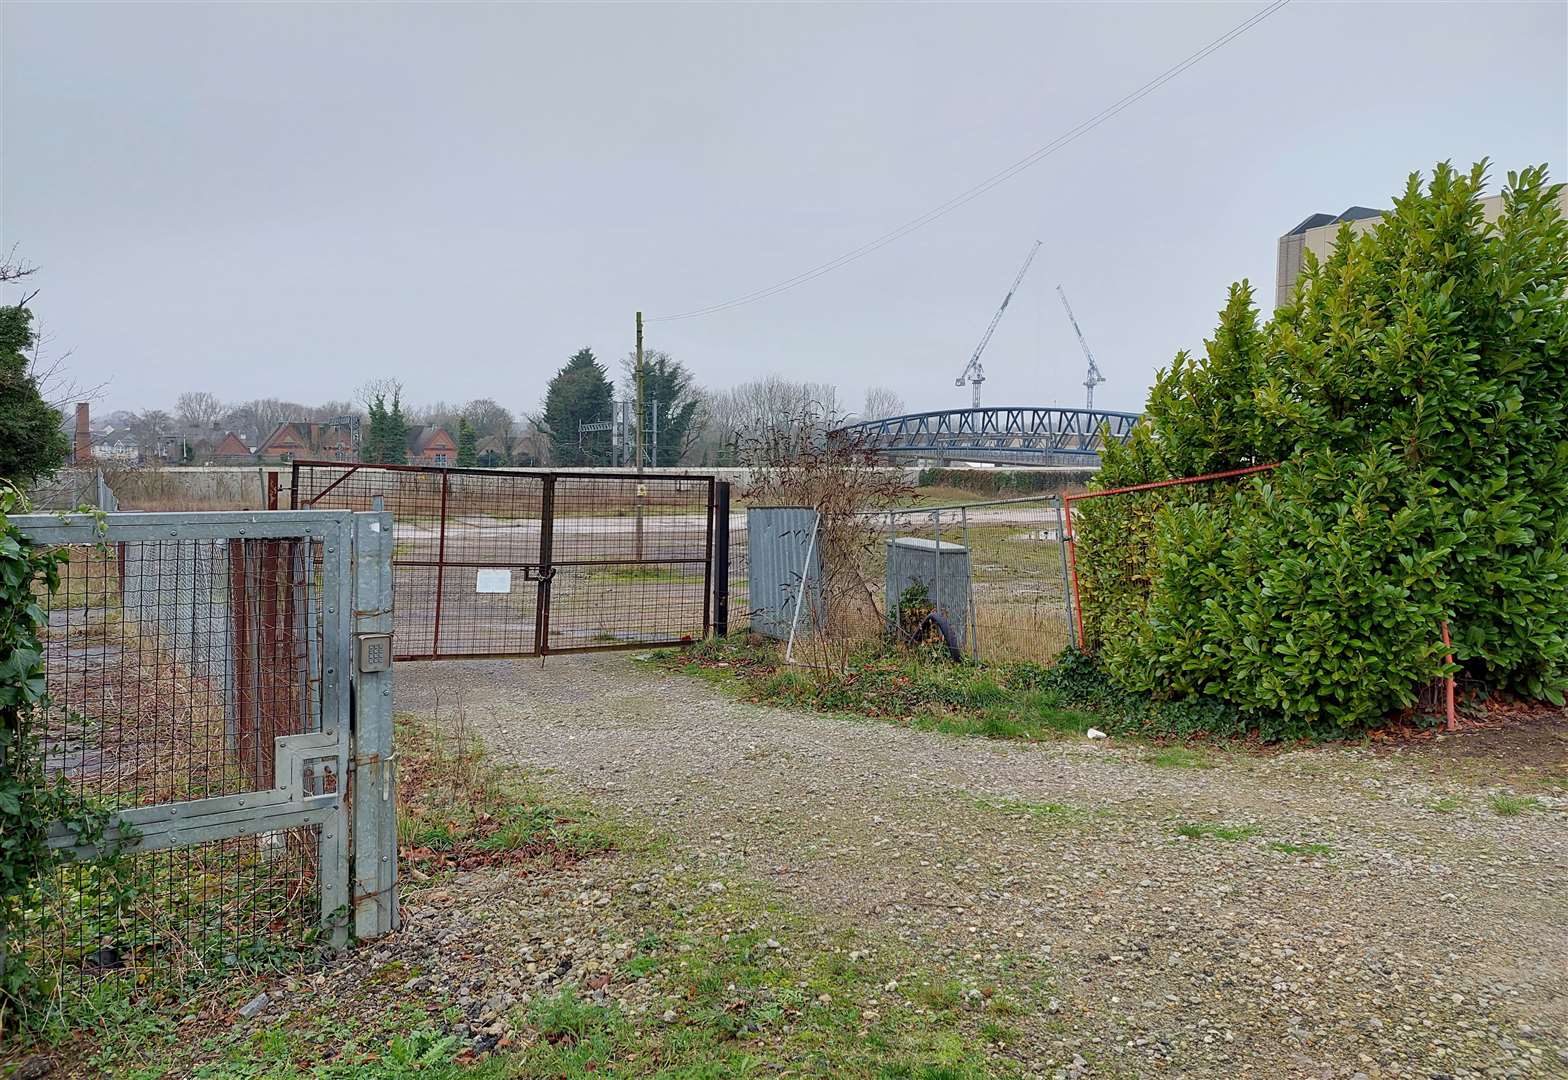 The site is accessed from Elwick Road